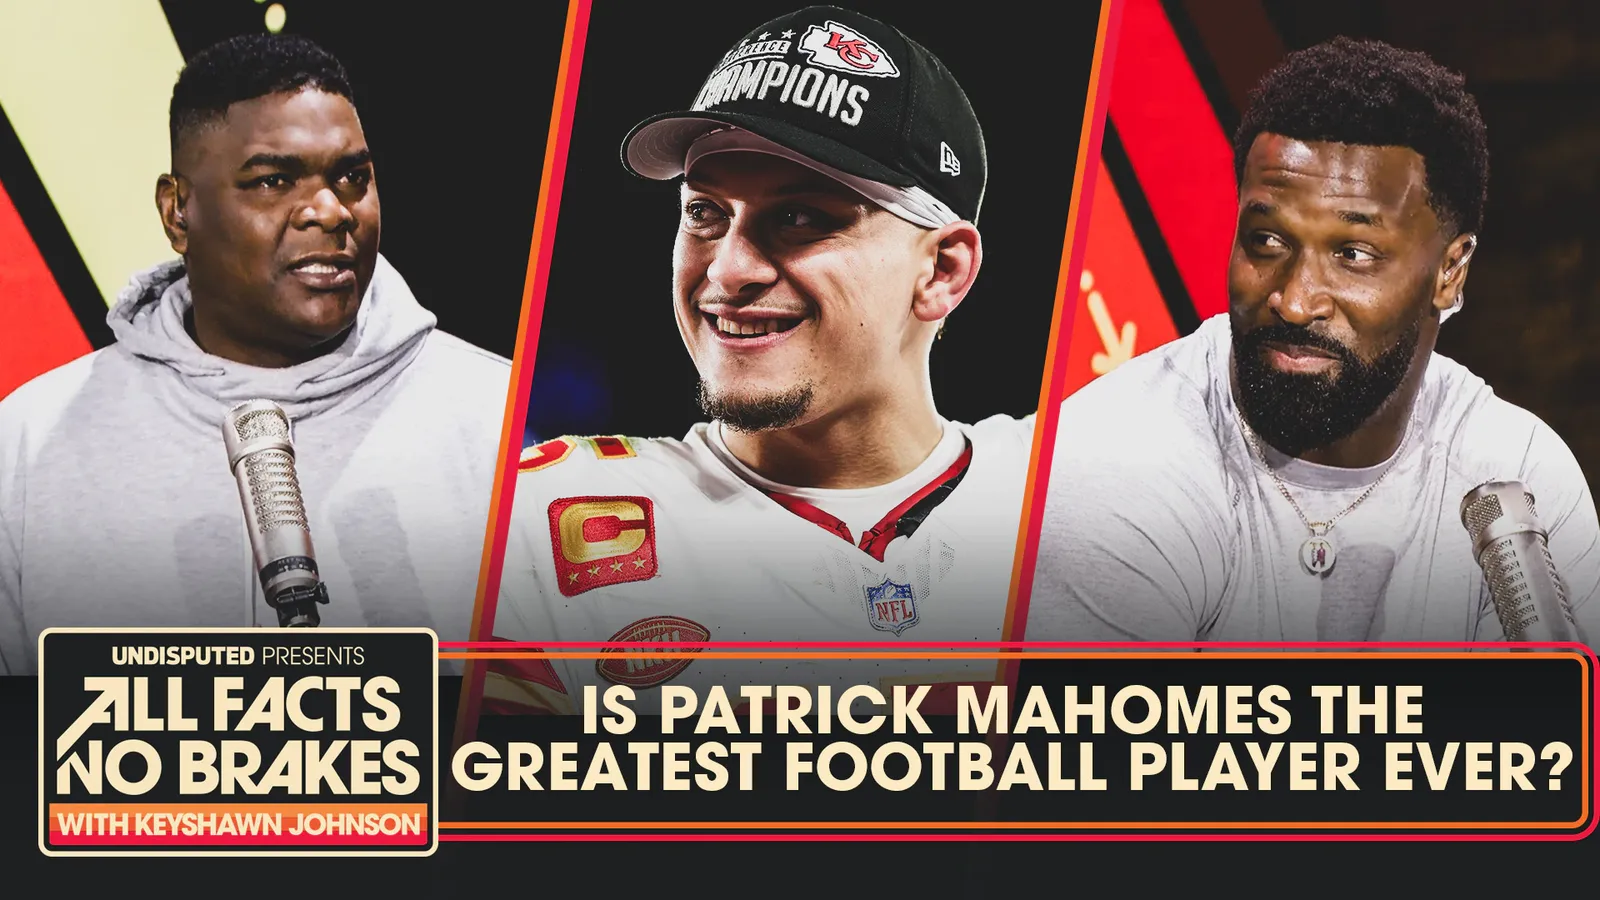 Patrick Mahomes the greatest football player of all time? 